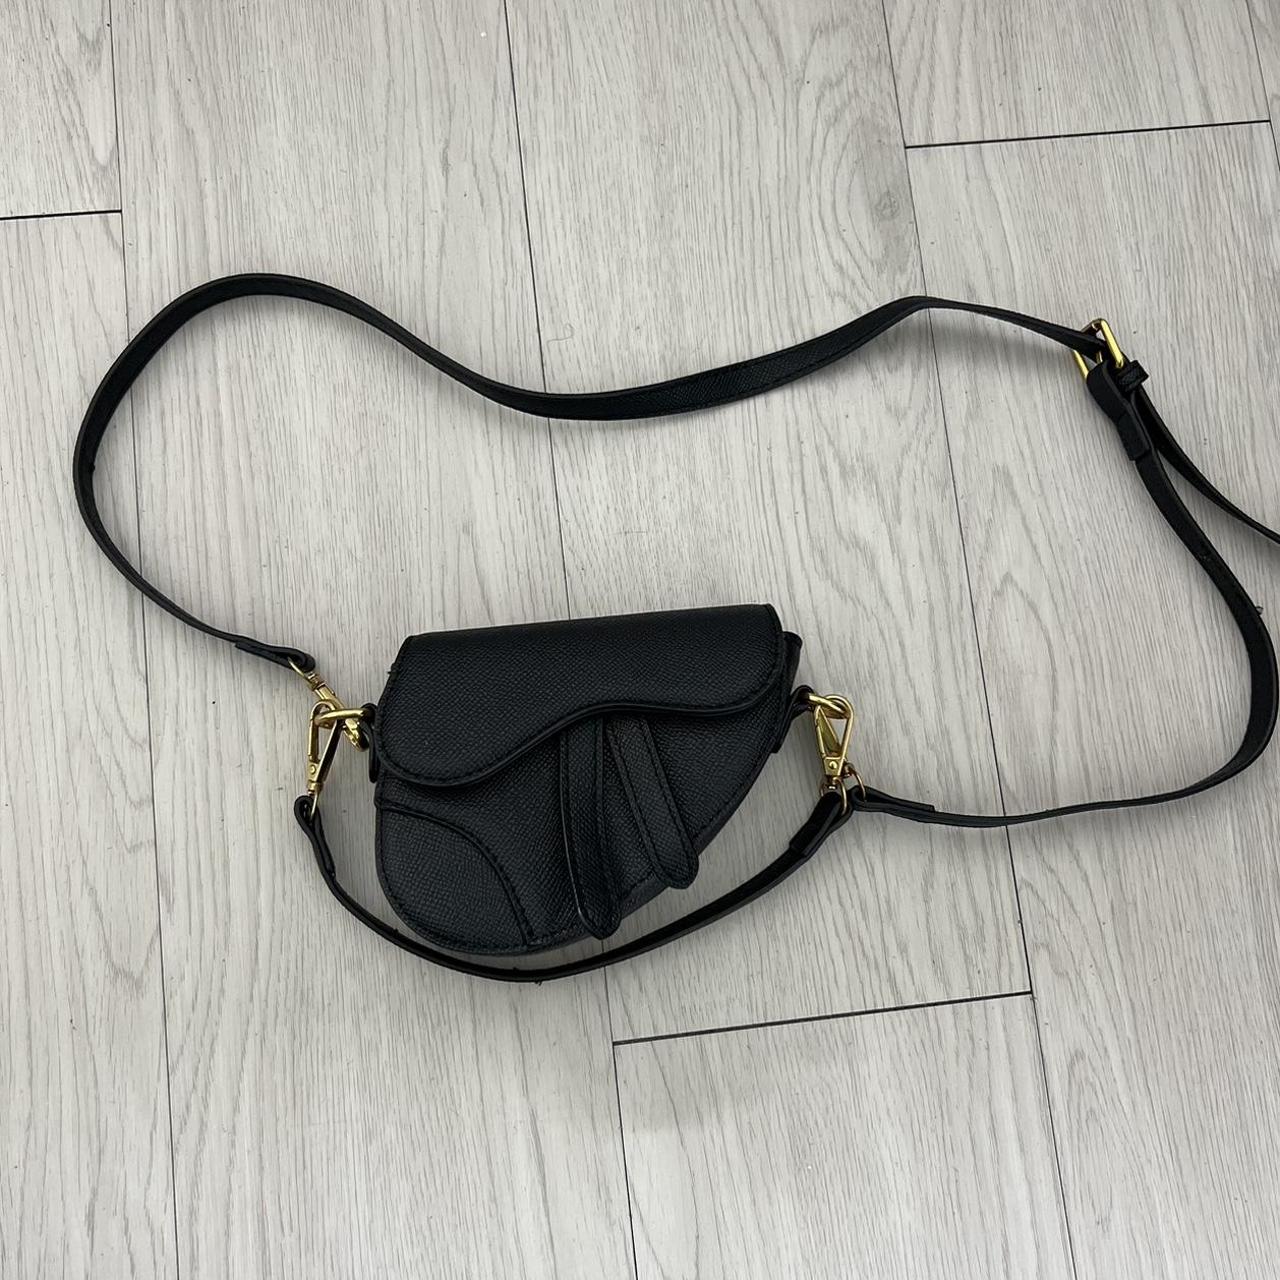 Dior Women's Black and Gold Bag (2)